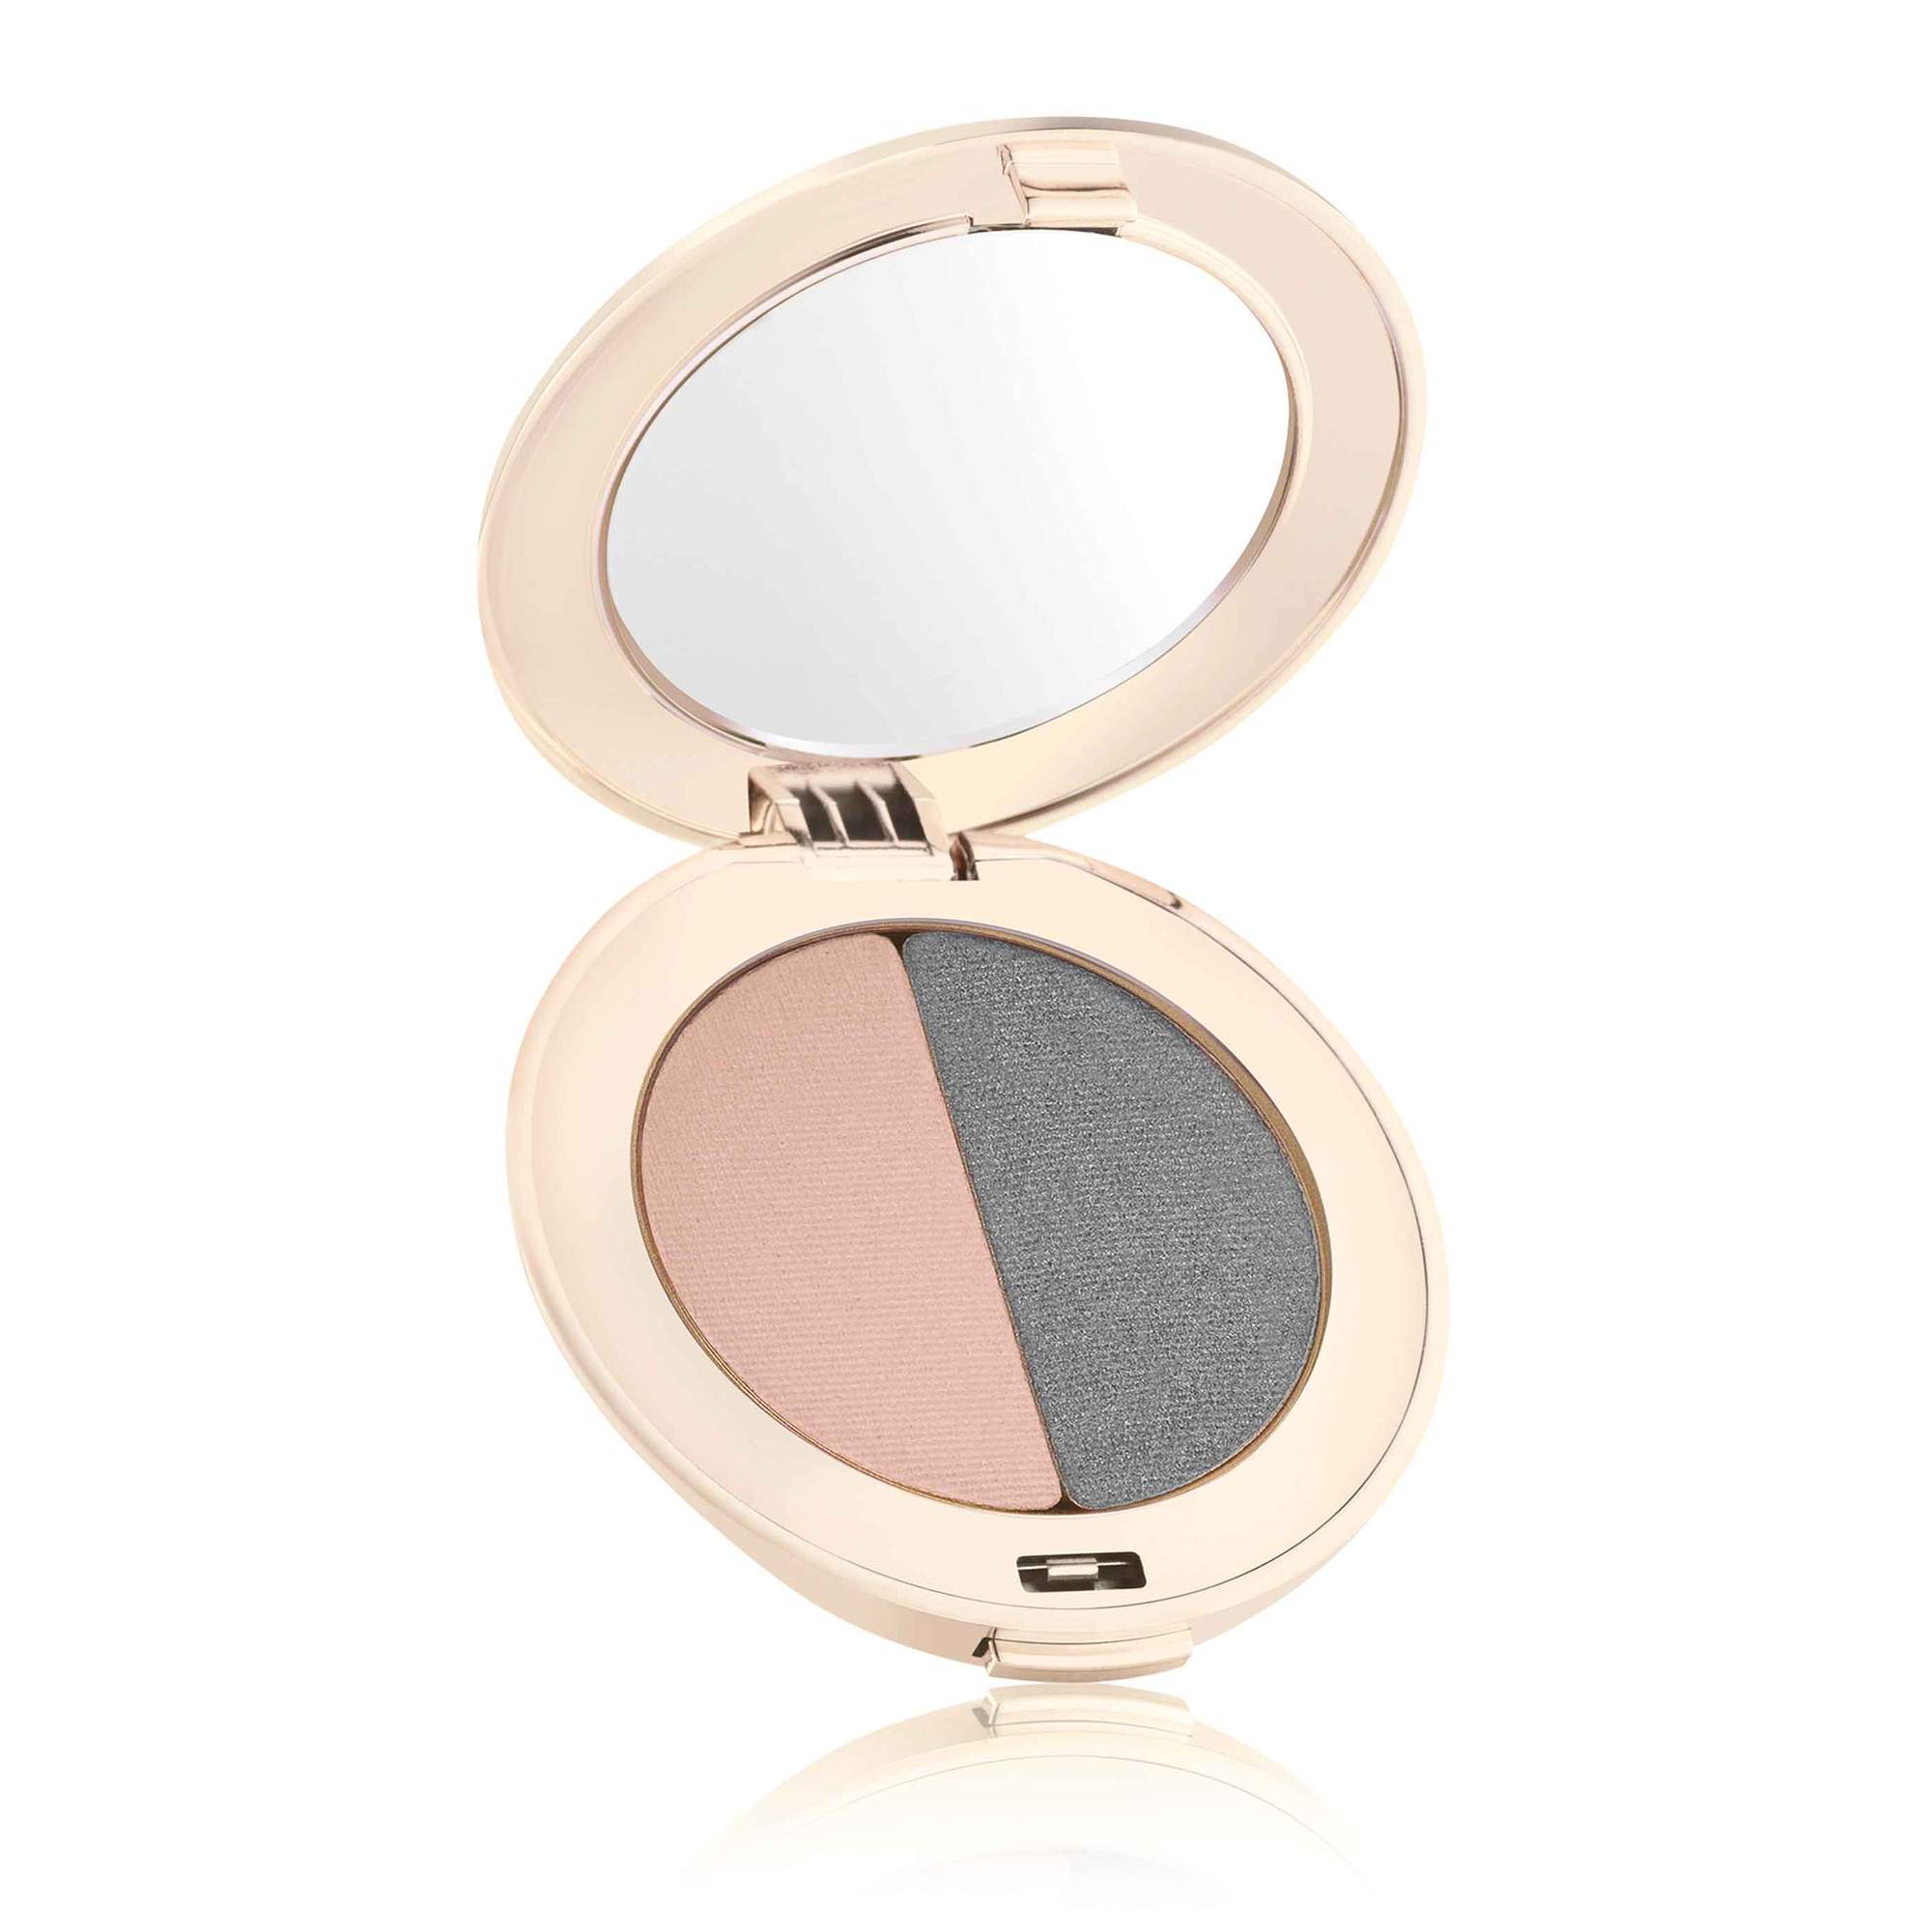 JANE IREDALE PURE PRESSED EYE SHADOW DUO